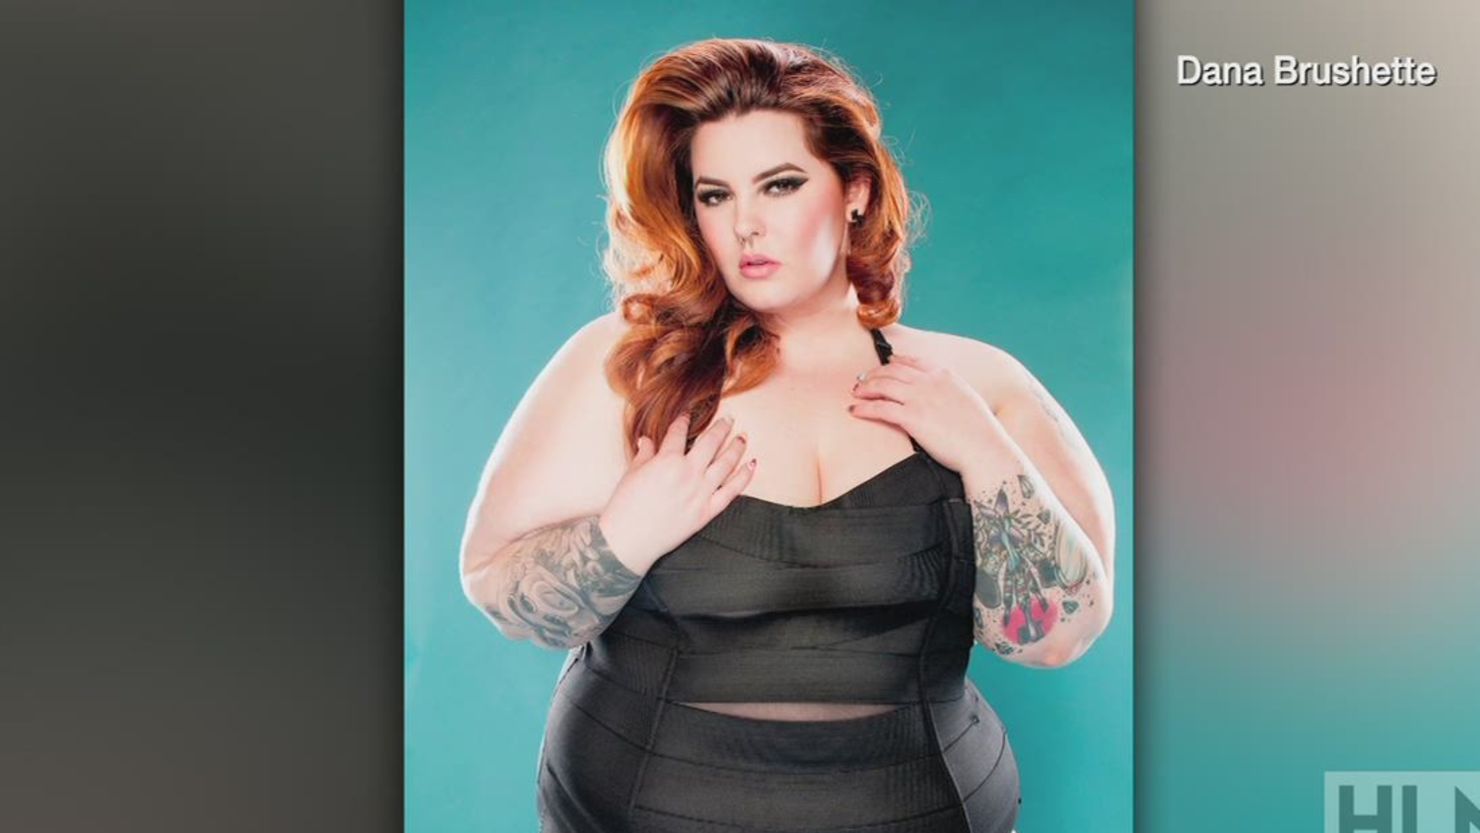 Instagram users are no longer blocked from searching for #curvy women like model Tess Holliday.